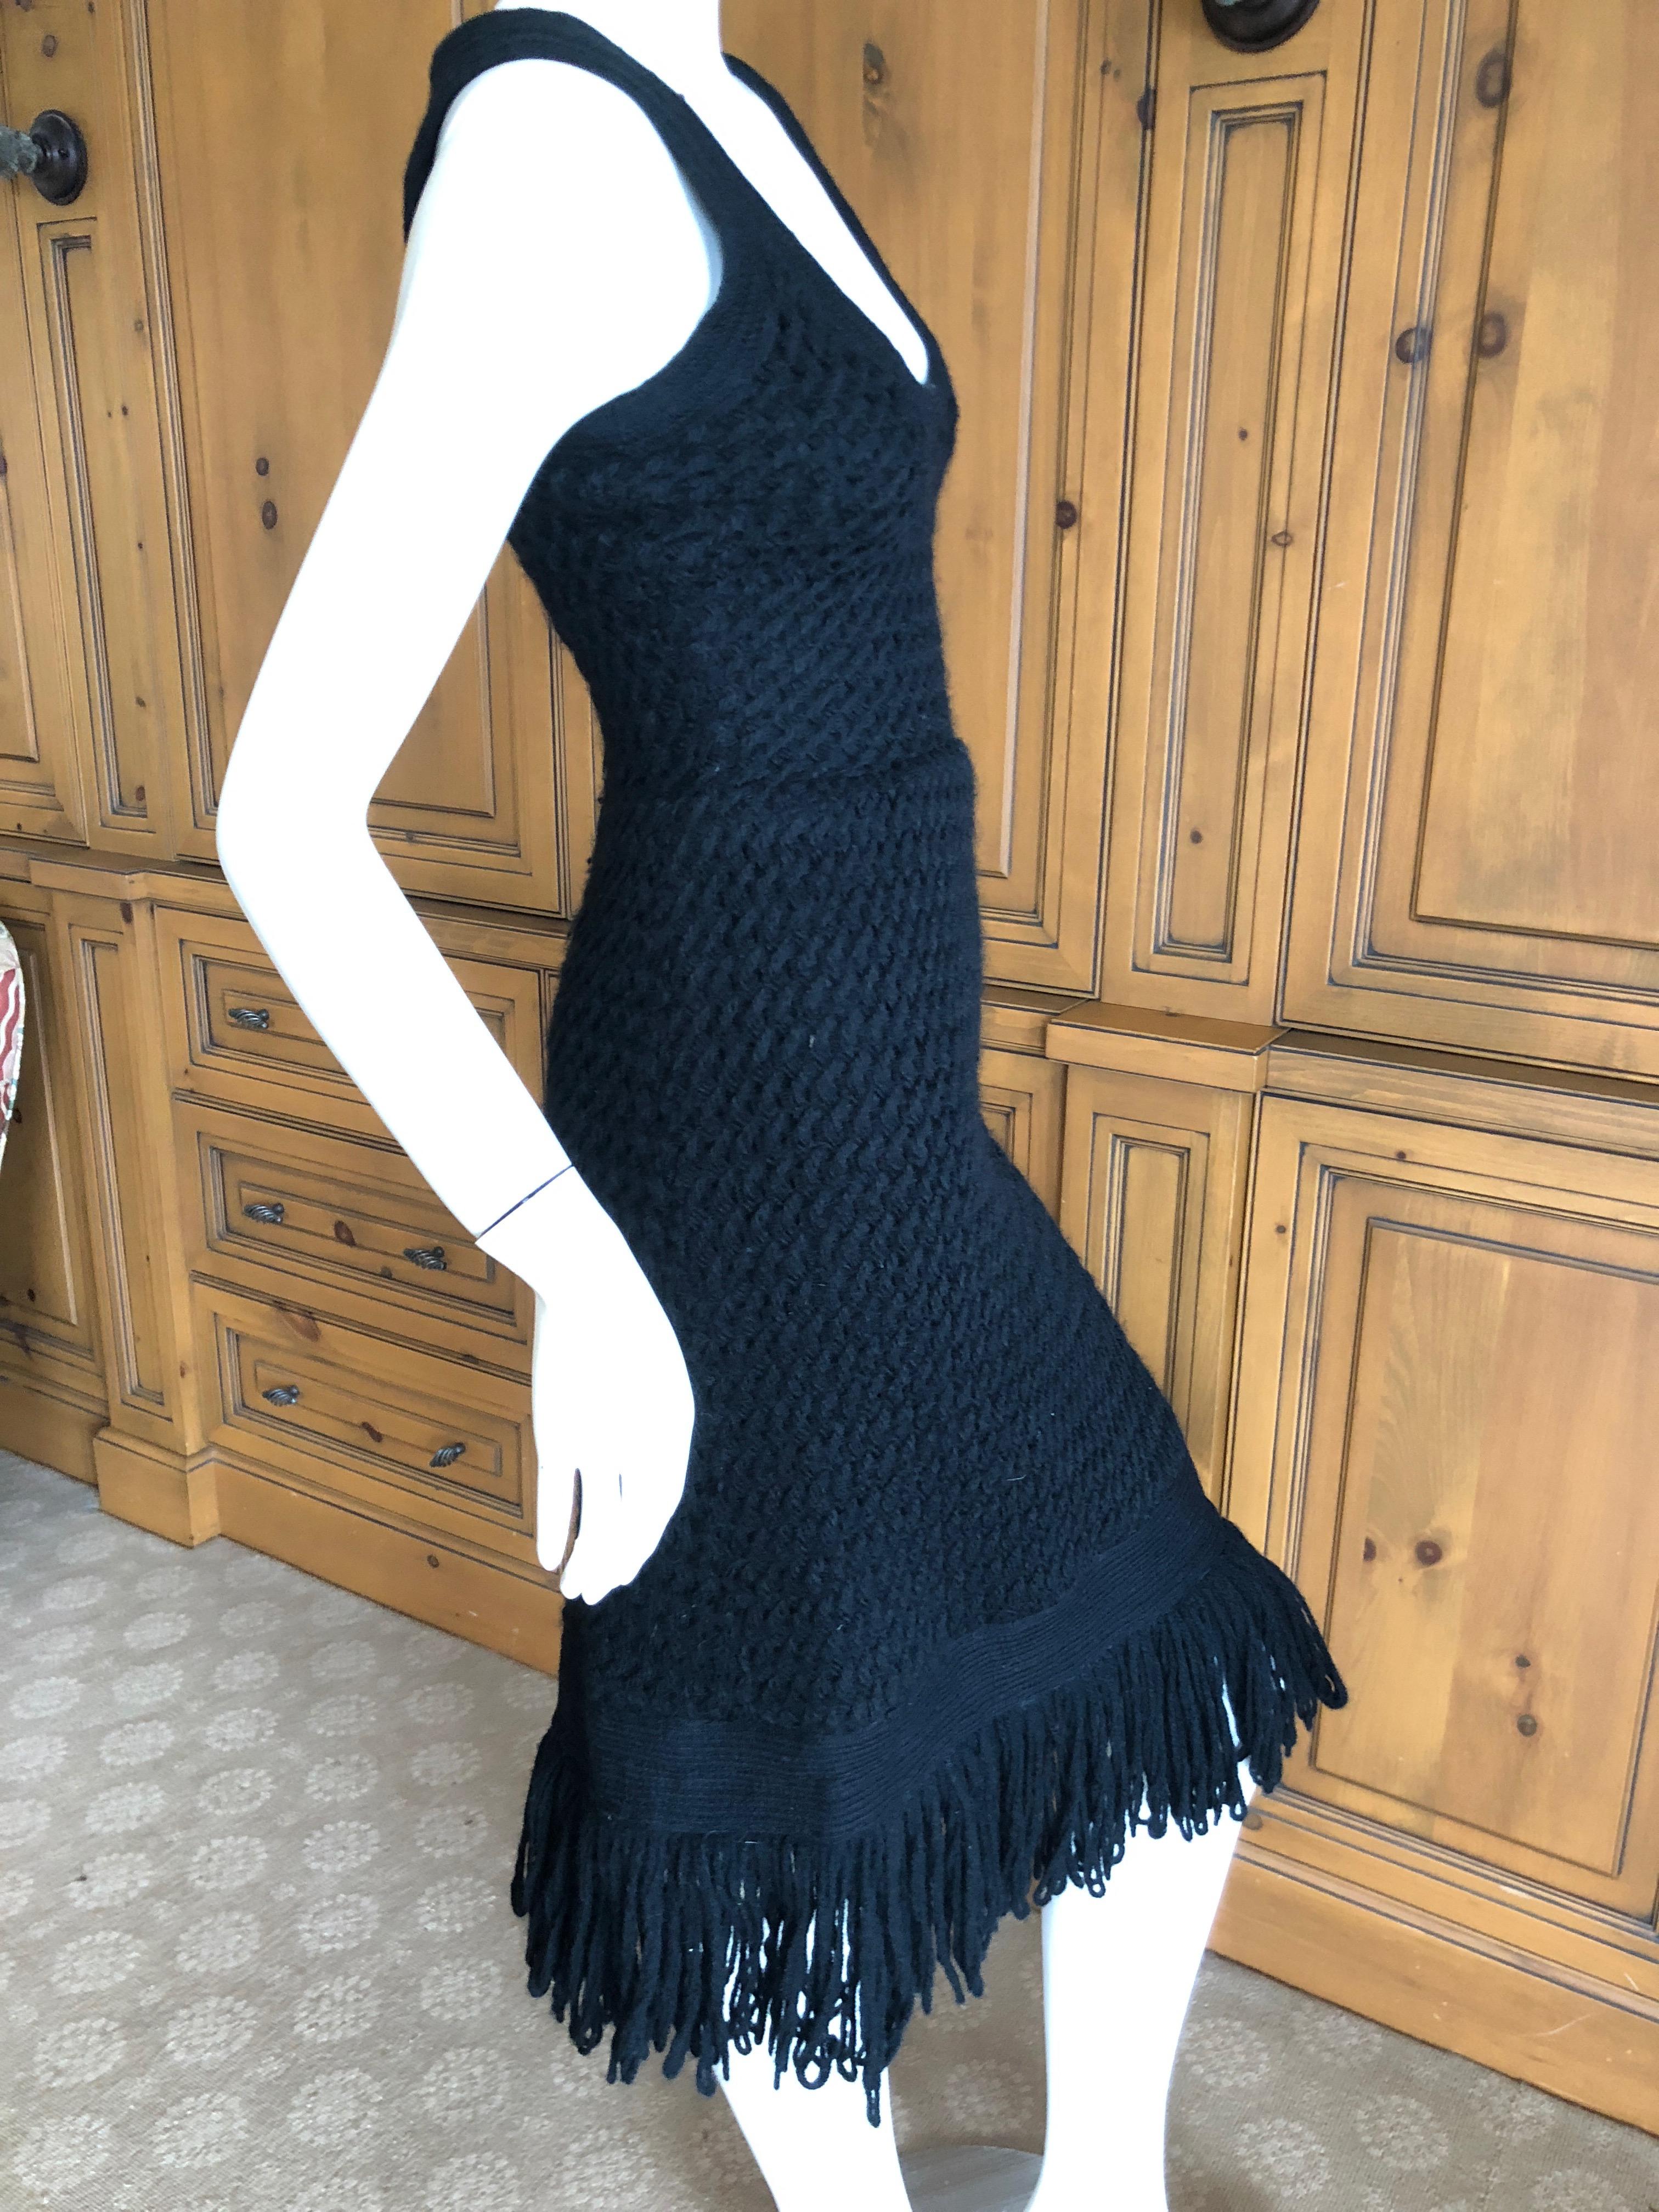 Cardinali Black Silk Lined Crochet Dress with Matching Fringed Shawl Fall 1971  In Good Condition For Sale In Cloverdale, CA